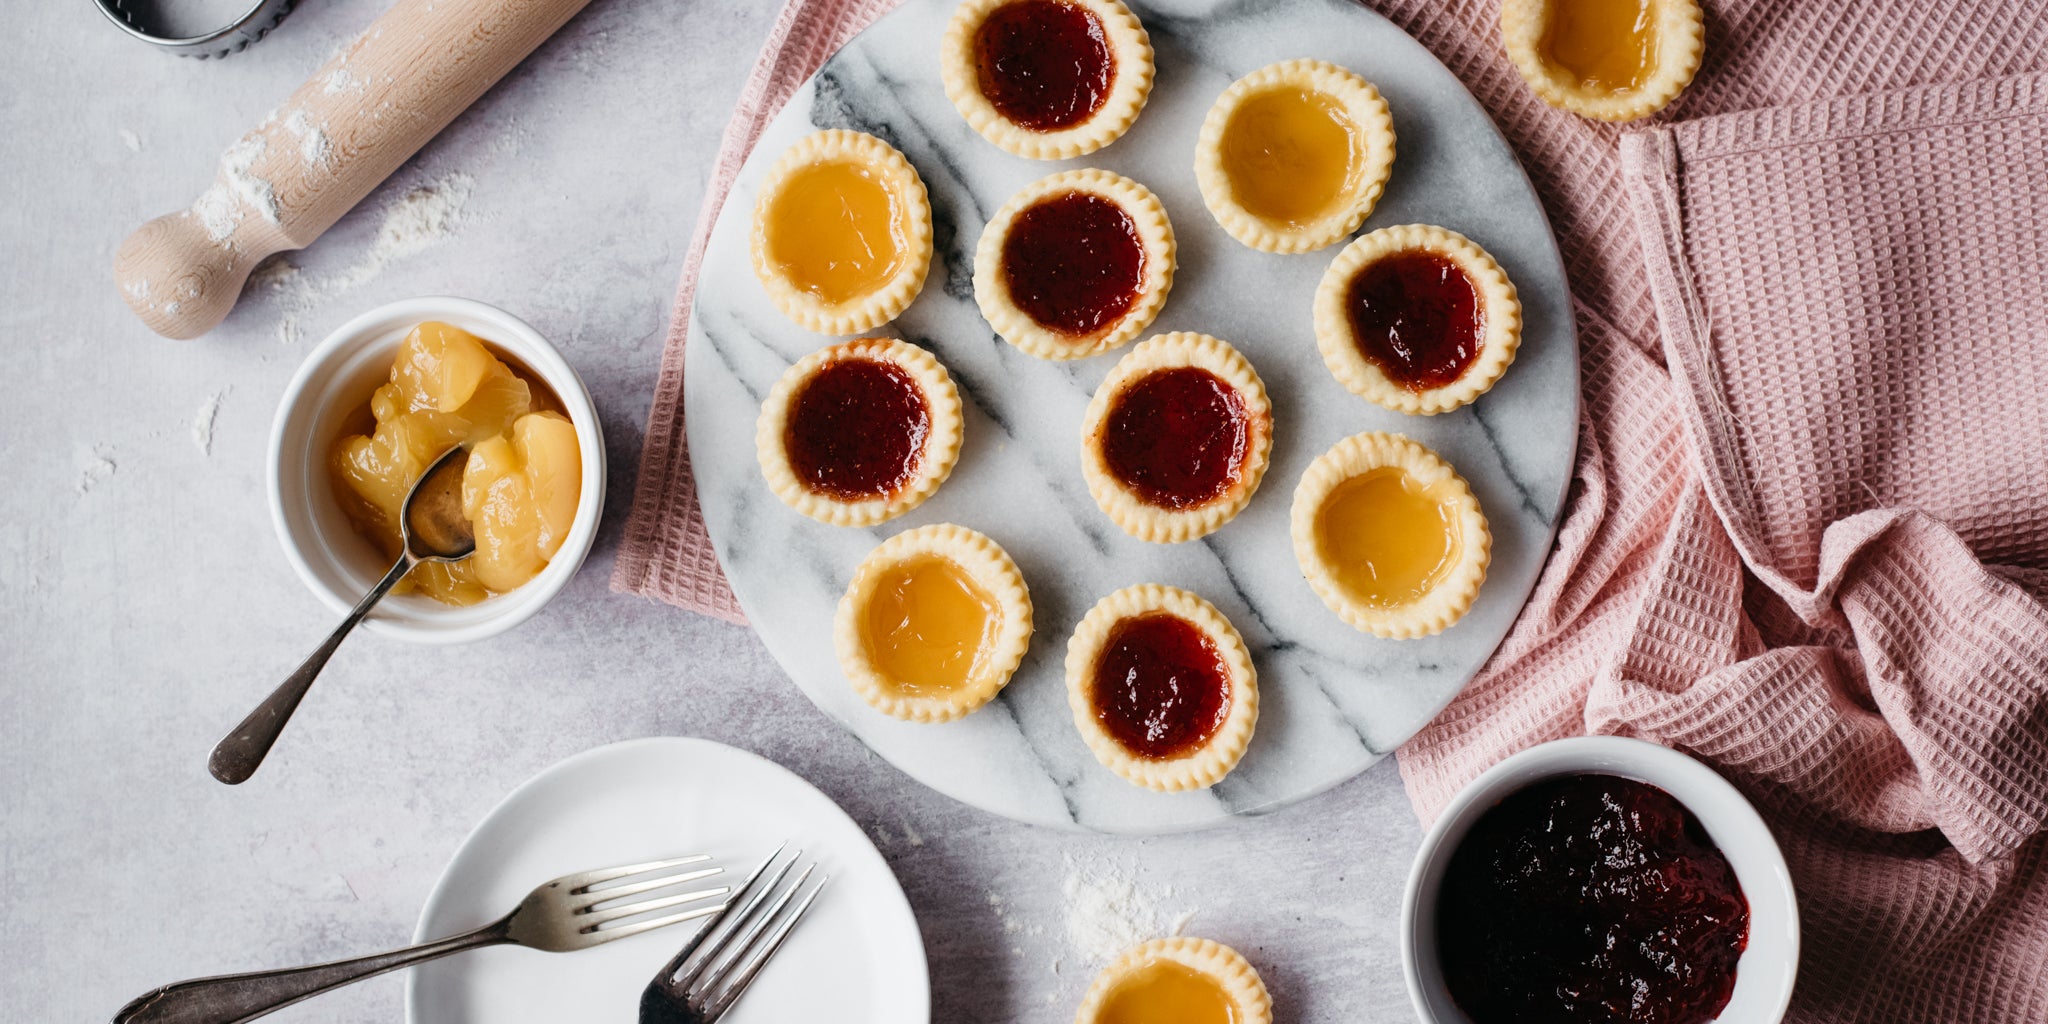 Top view of Apricot & Strawberry Jam Tarts served on a marble board, next to a bowl of jam and a rolling pin